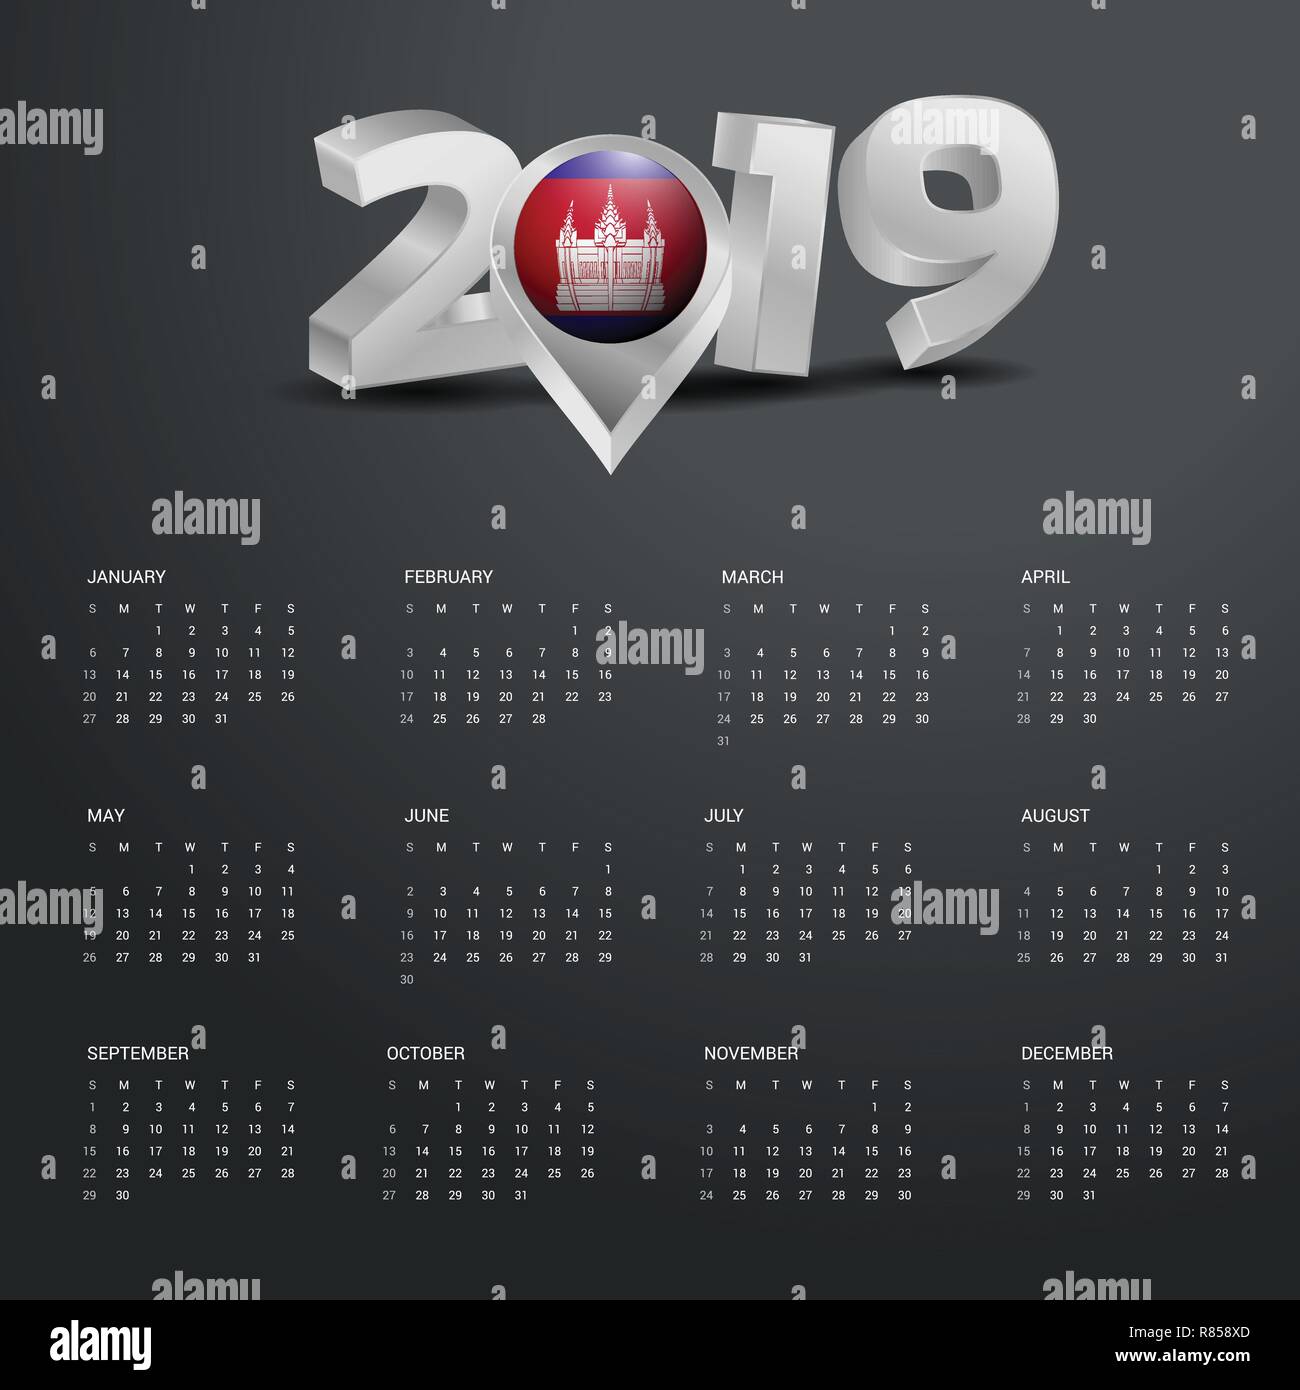 2019 Calendar Template. Grey Typography with Cambodia Country Map Golden Typography Header Stock Vector